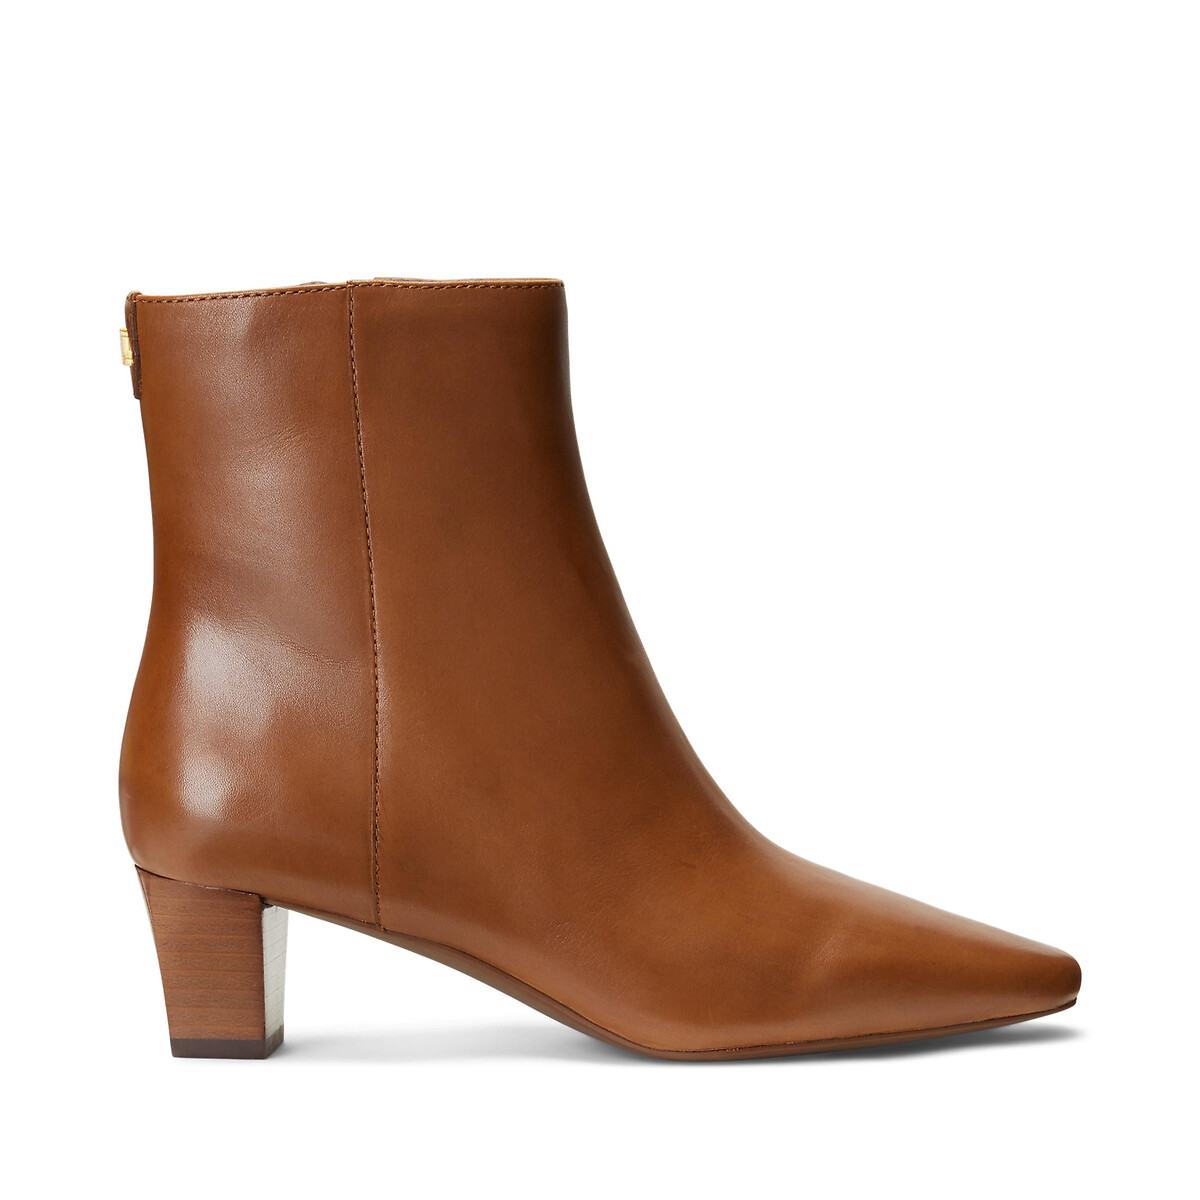 Willa Leather Ankle Boots with Pointed Toe, Zip Fastening and Block Heel